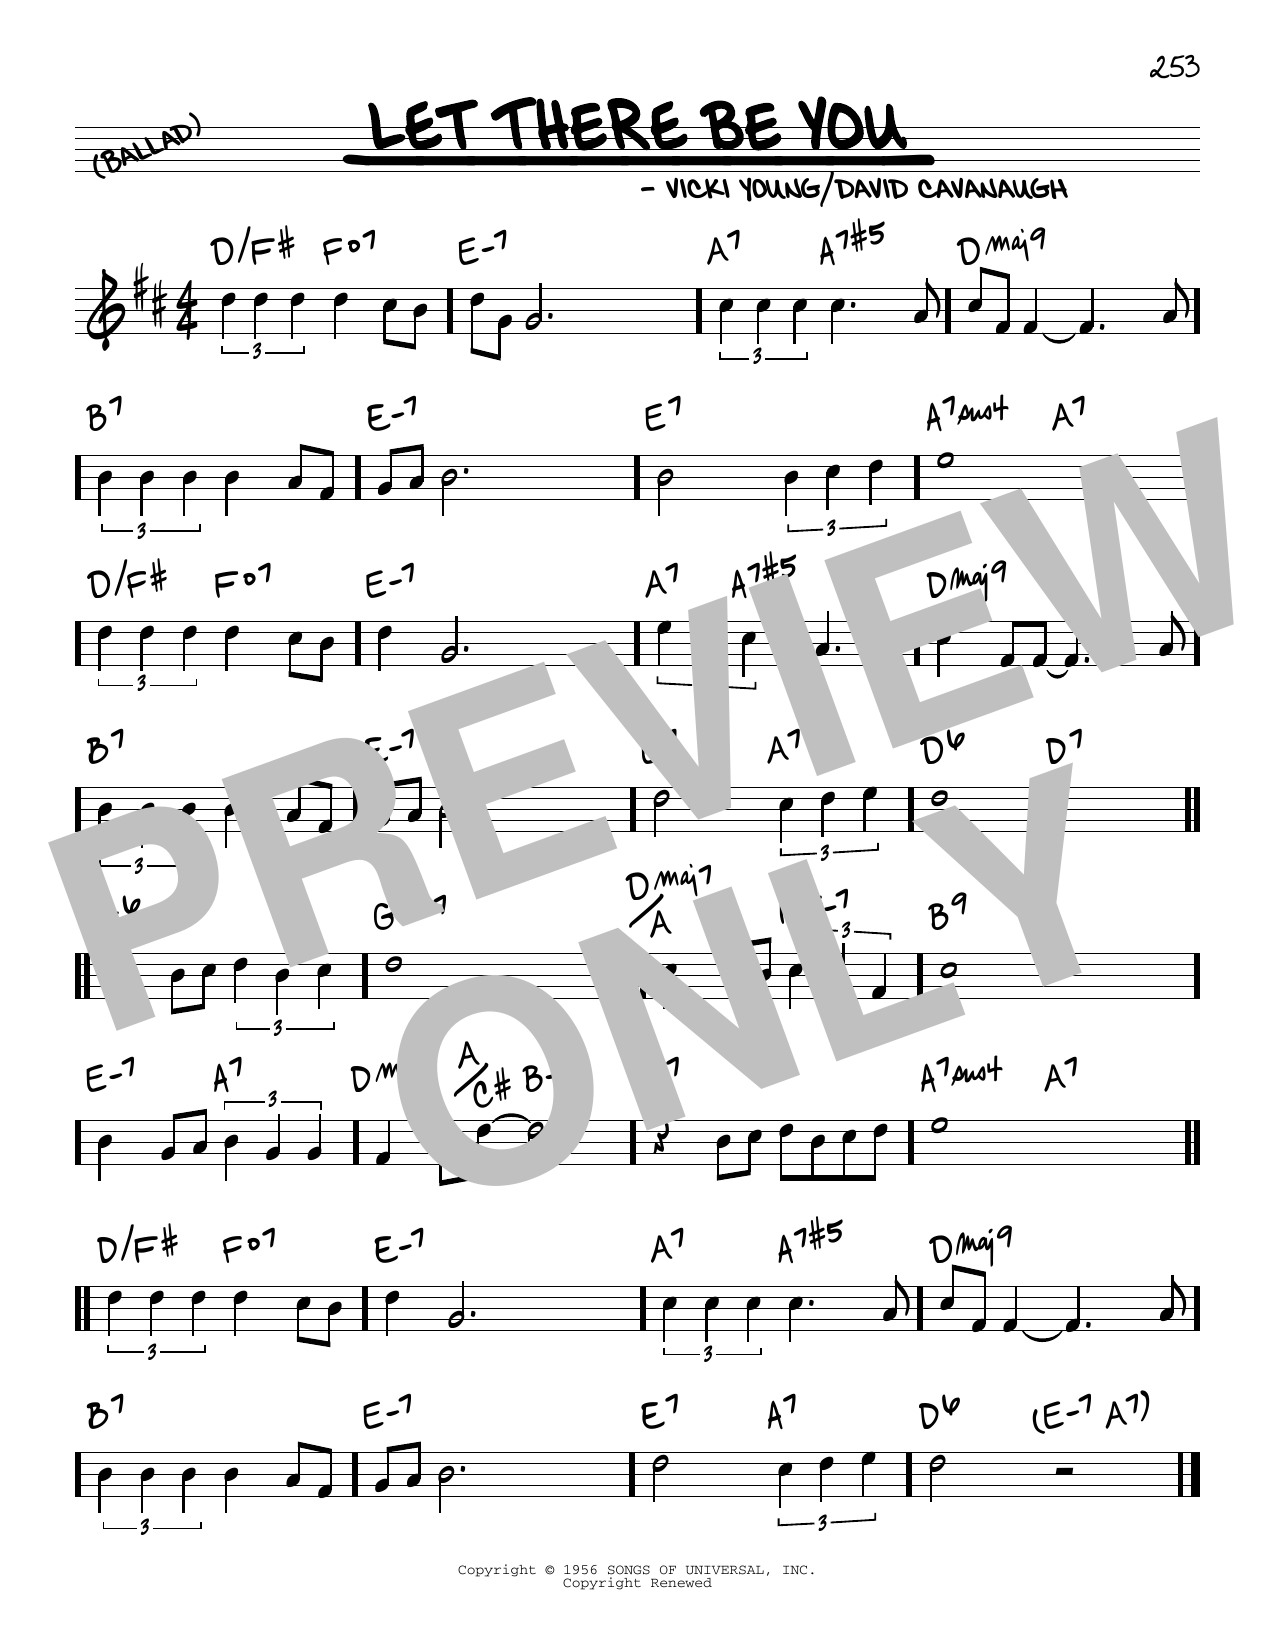 Download Dave Cavanaugh and Vicki Young Let There Be You Sheet Music